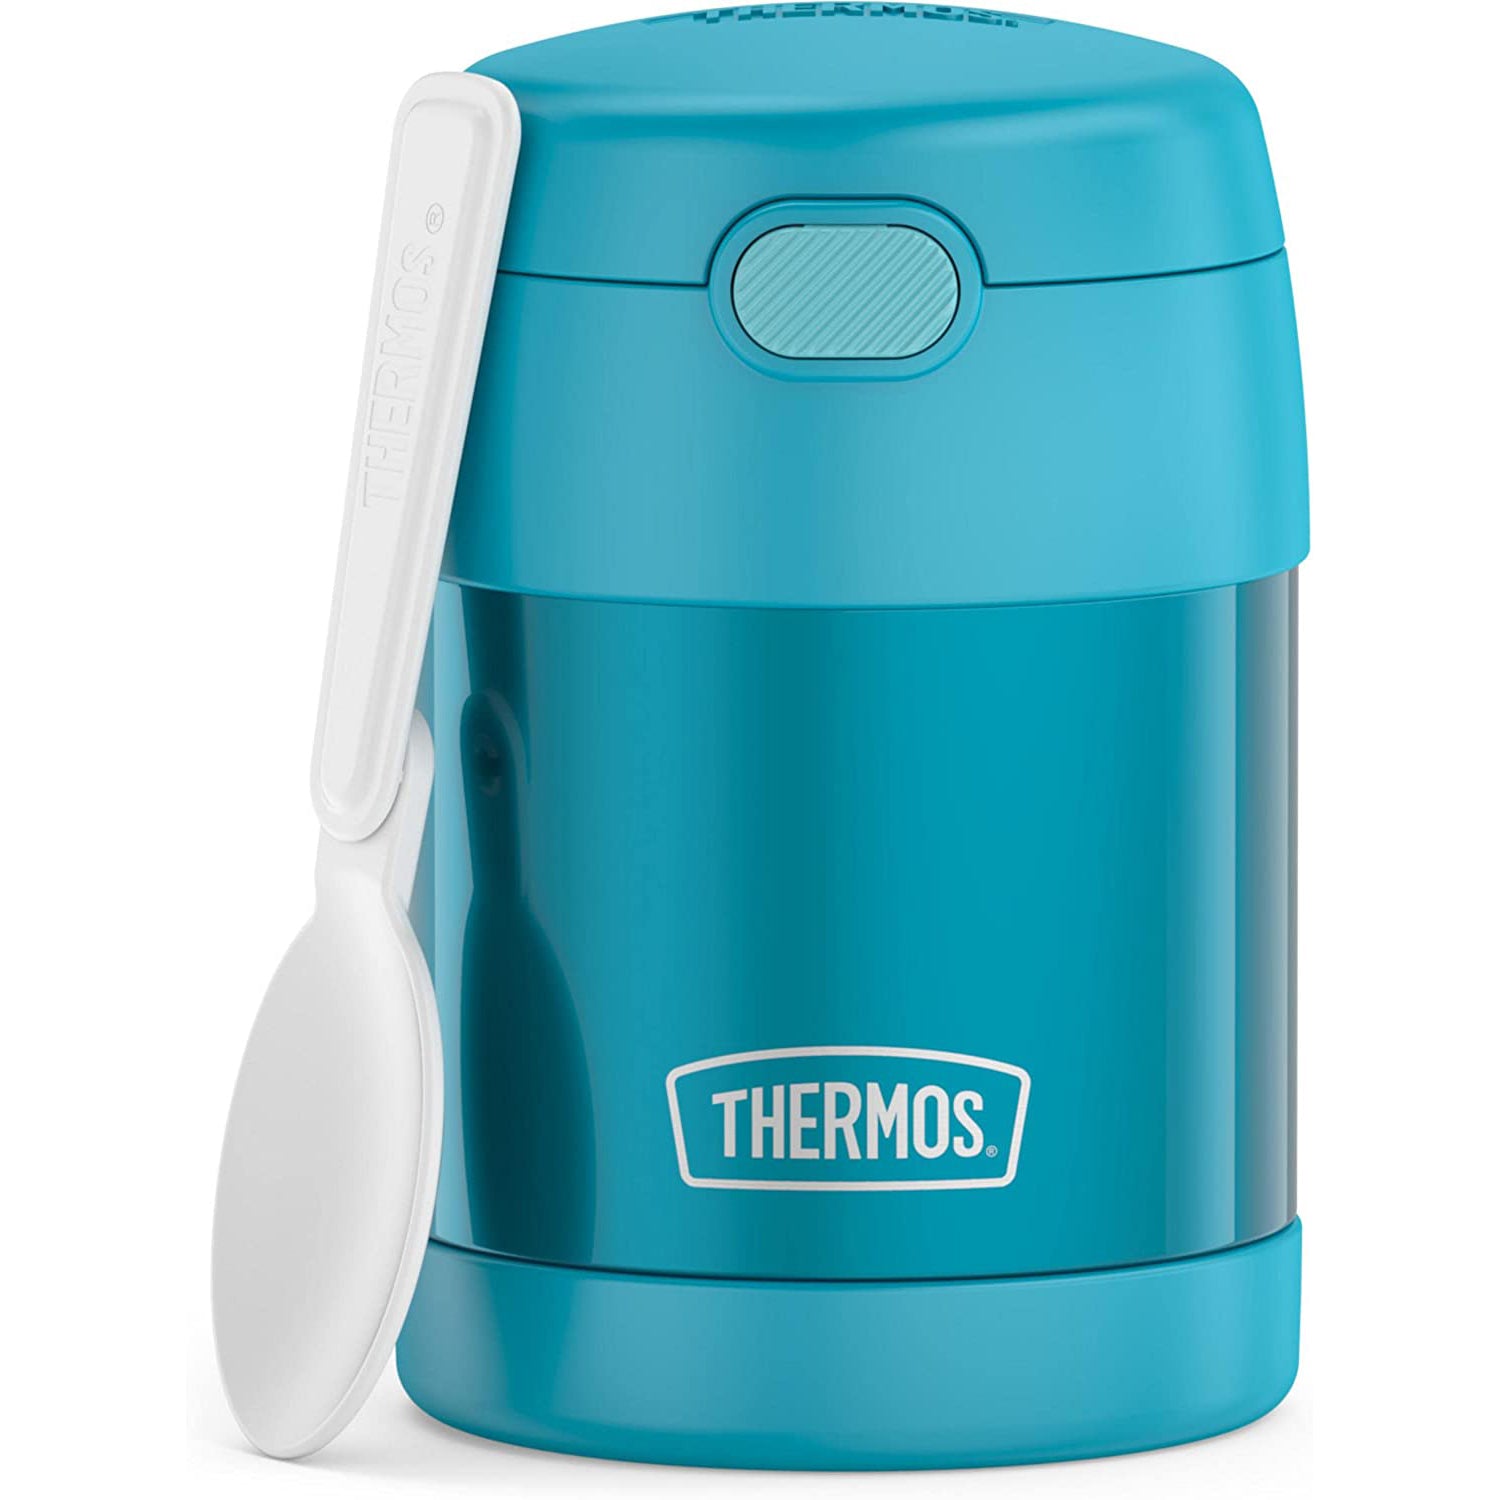 THERMOS FUNTAINER 10 Ounce Stainless Steel Vacuum Insulated Kids Food Jar, Teal